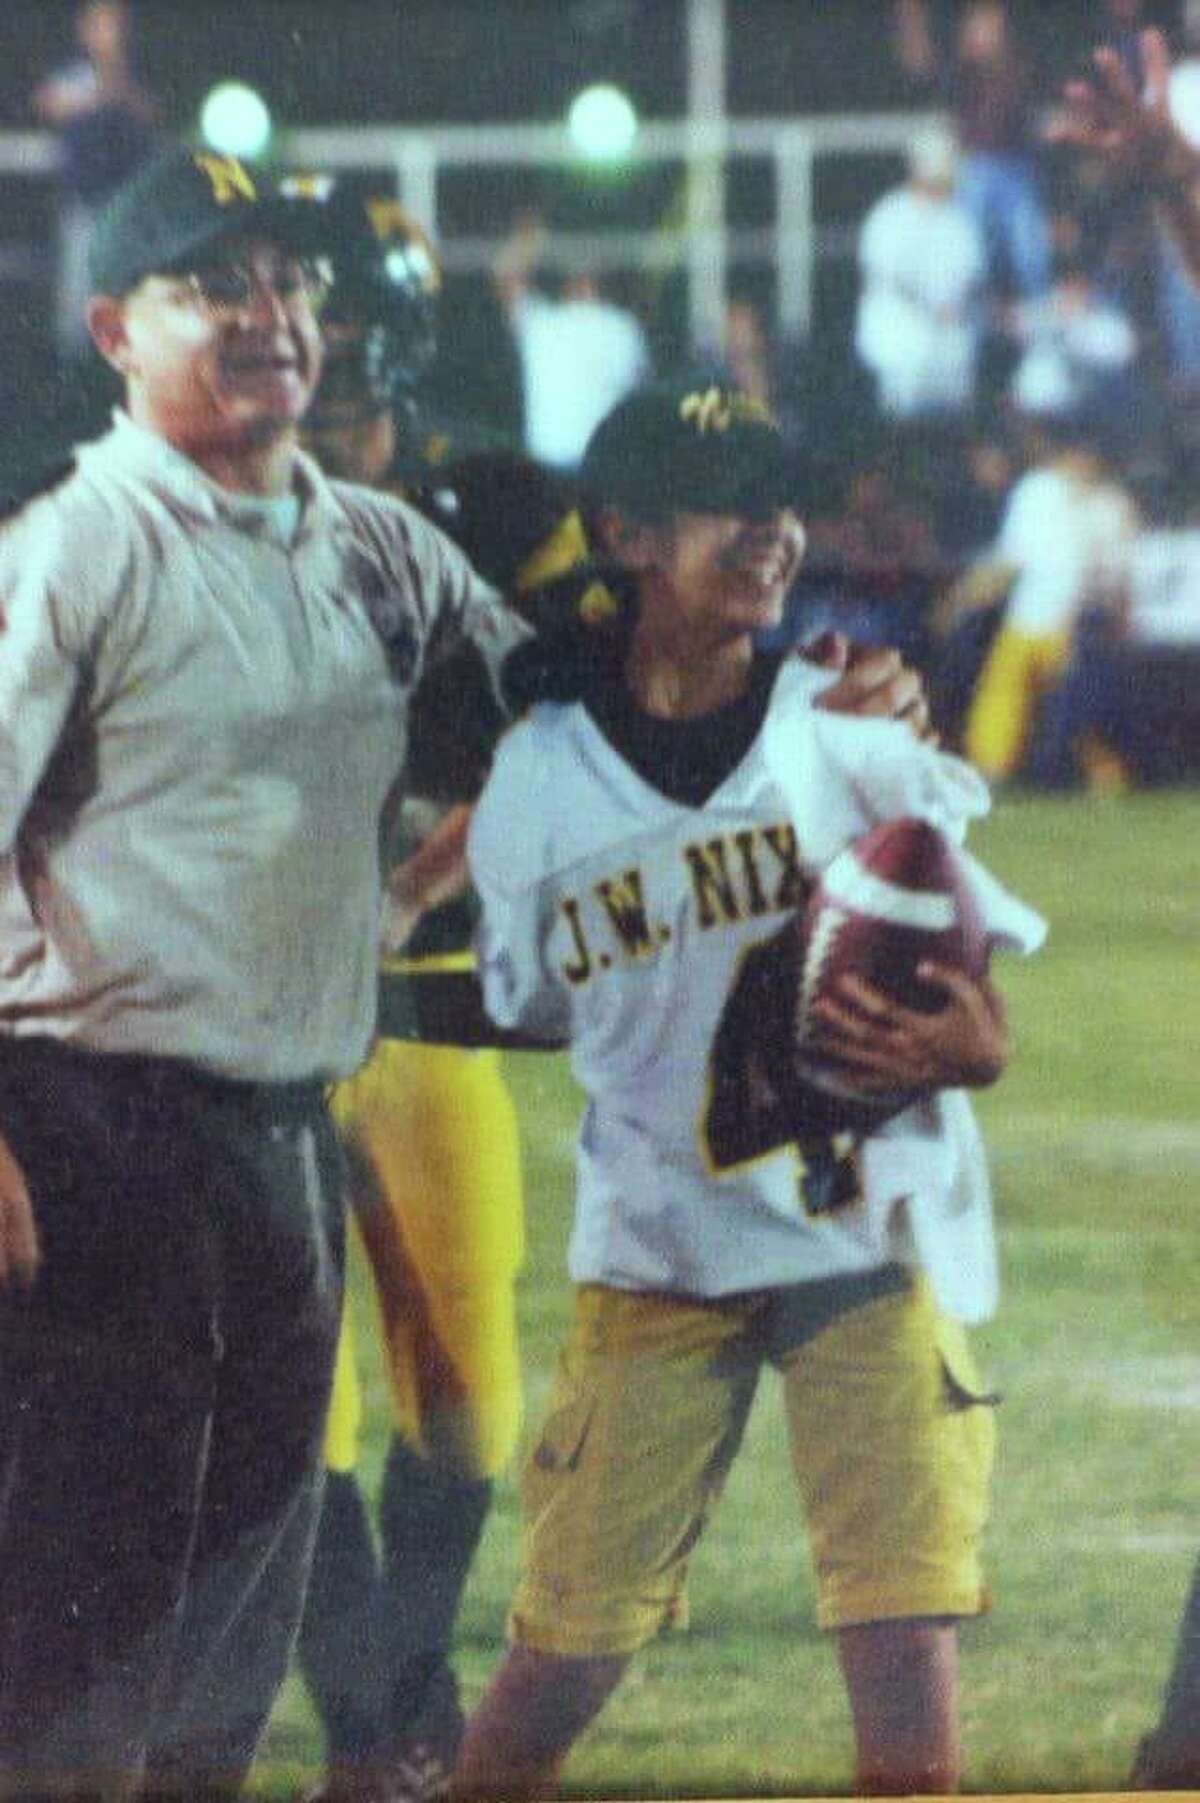 Alex and Robyn Colin are pictured on the sidelines during a 2001 Nixon football game.